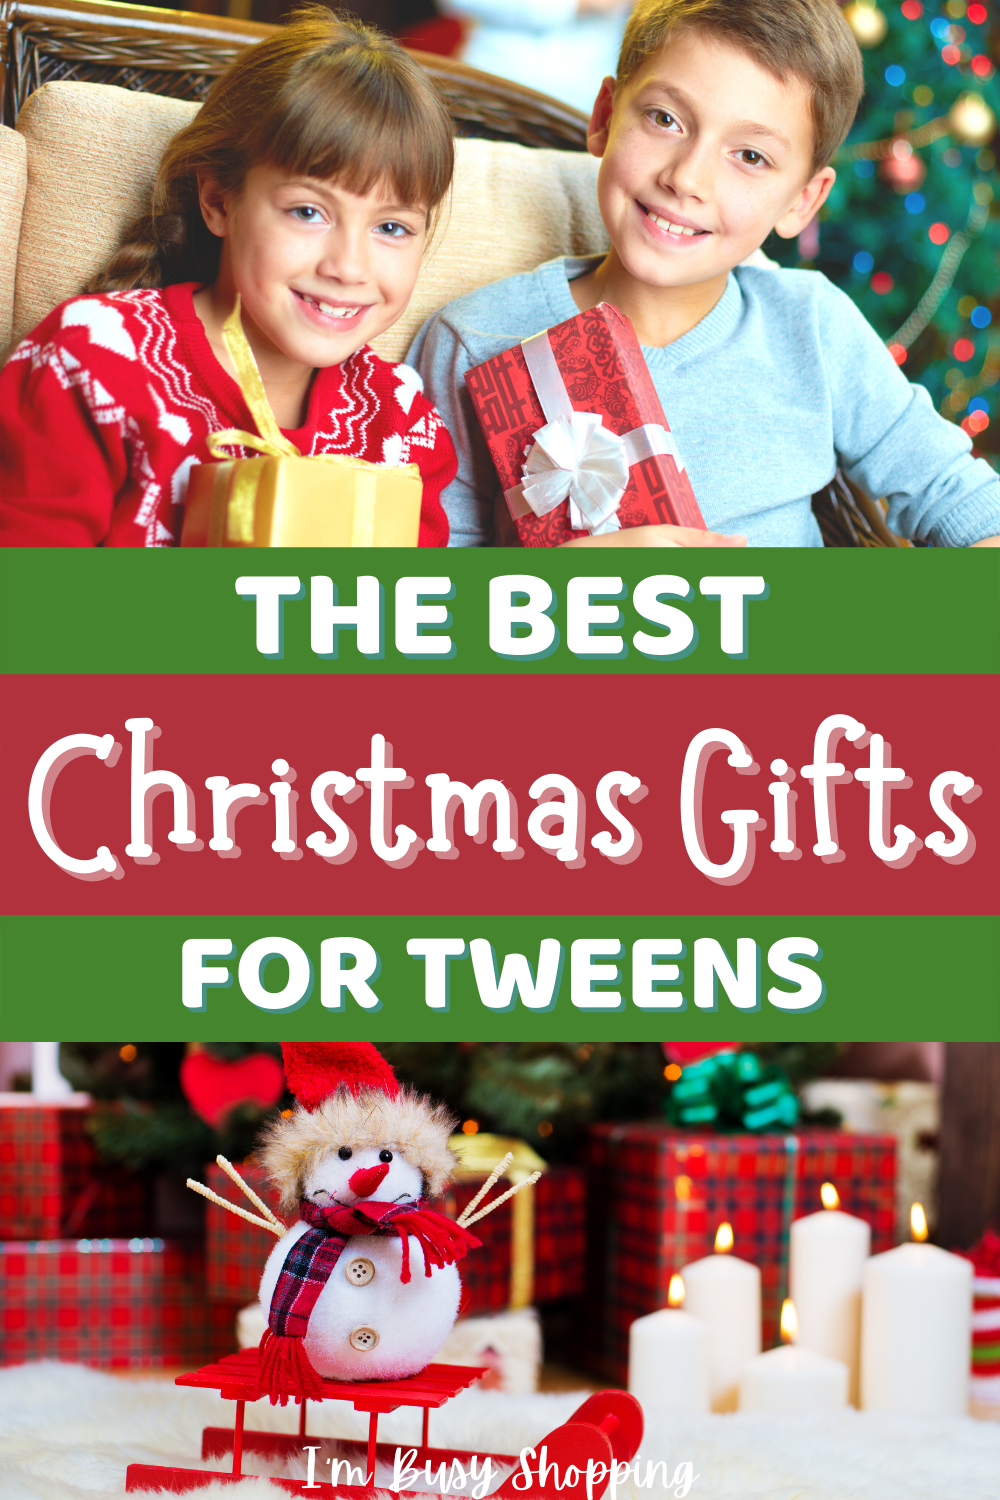 Pin showing the Best Christmas Gifts for Tweens